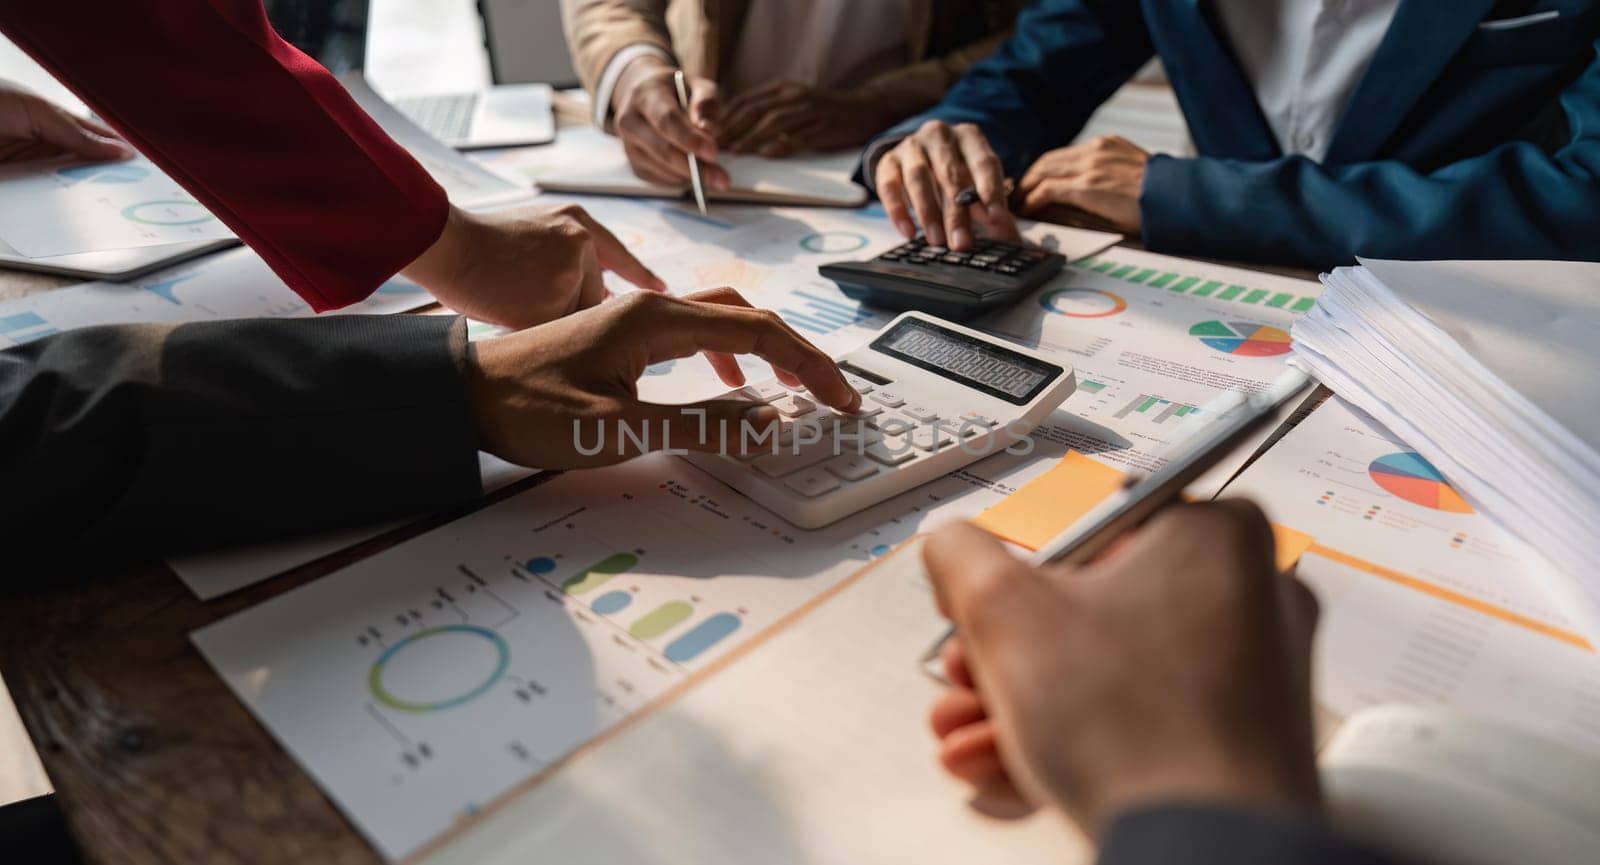 Business team analyzes financial business finance reports on laptop and graph documents during corporate meeting discussions showing successful teamwork, business meeting ideas.